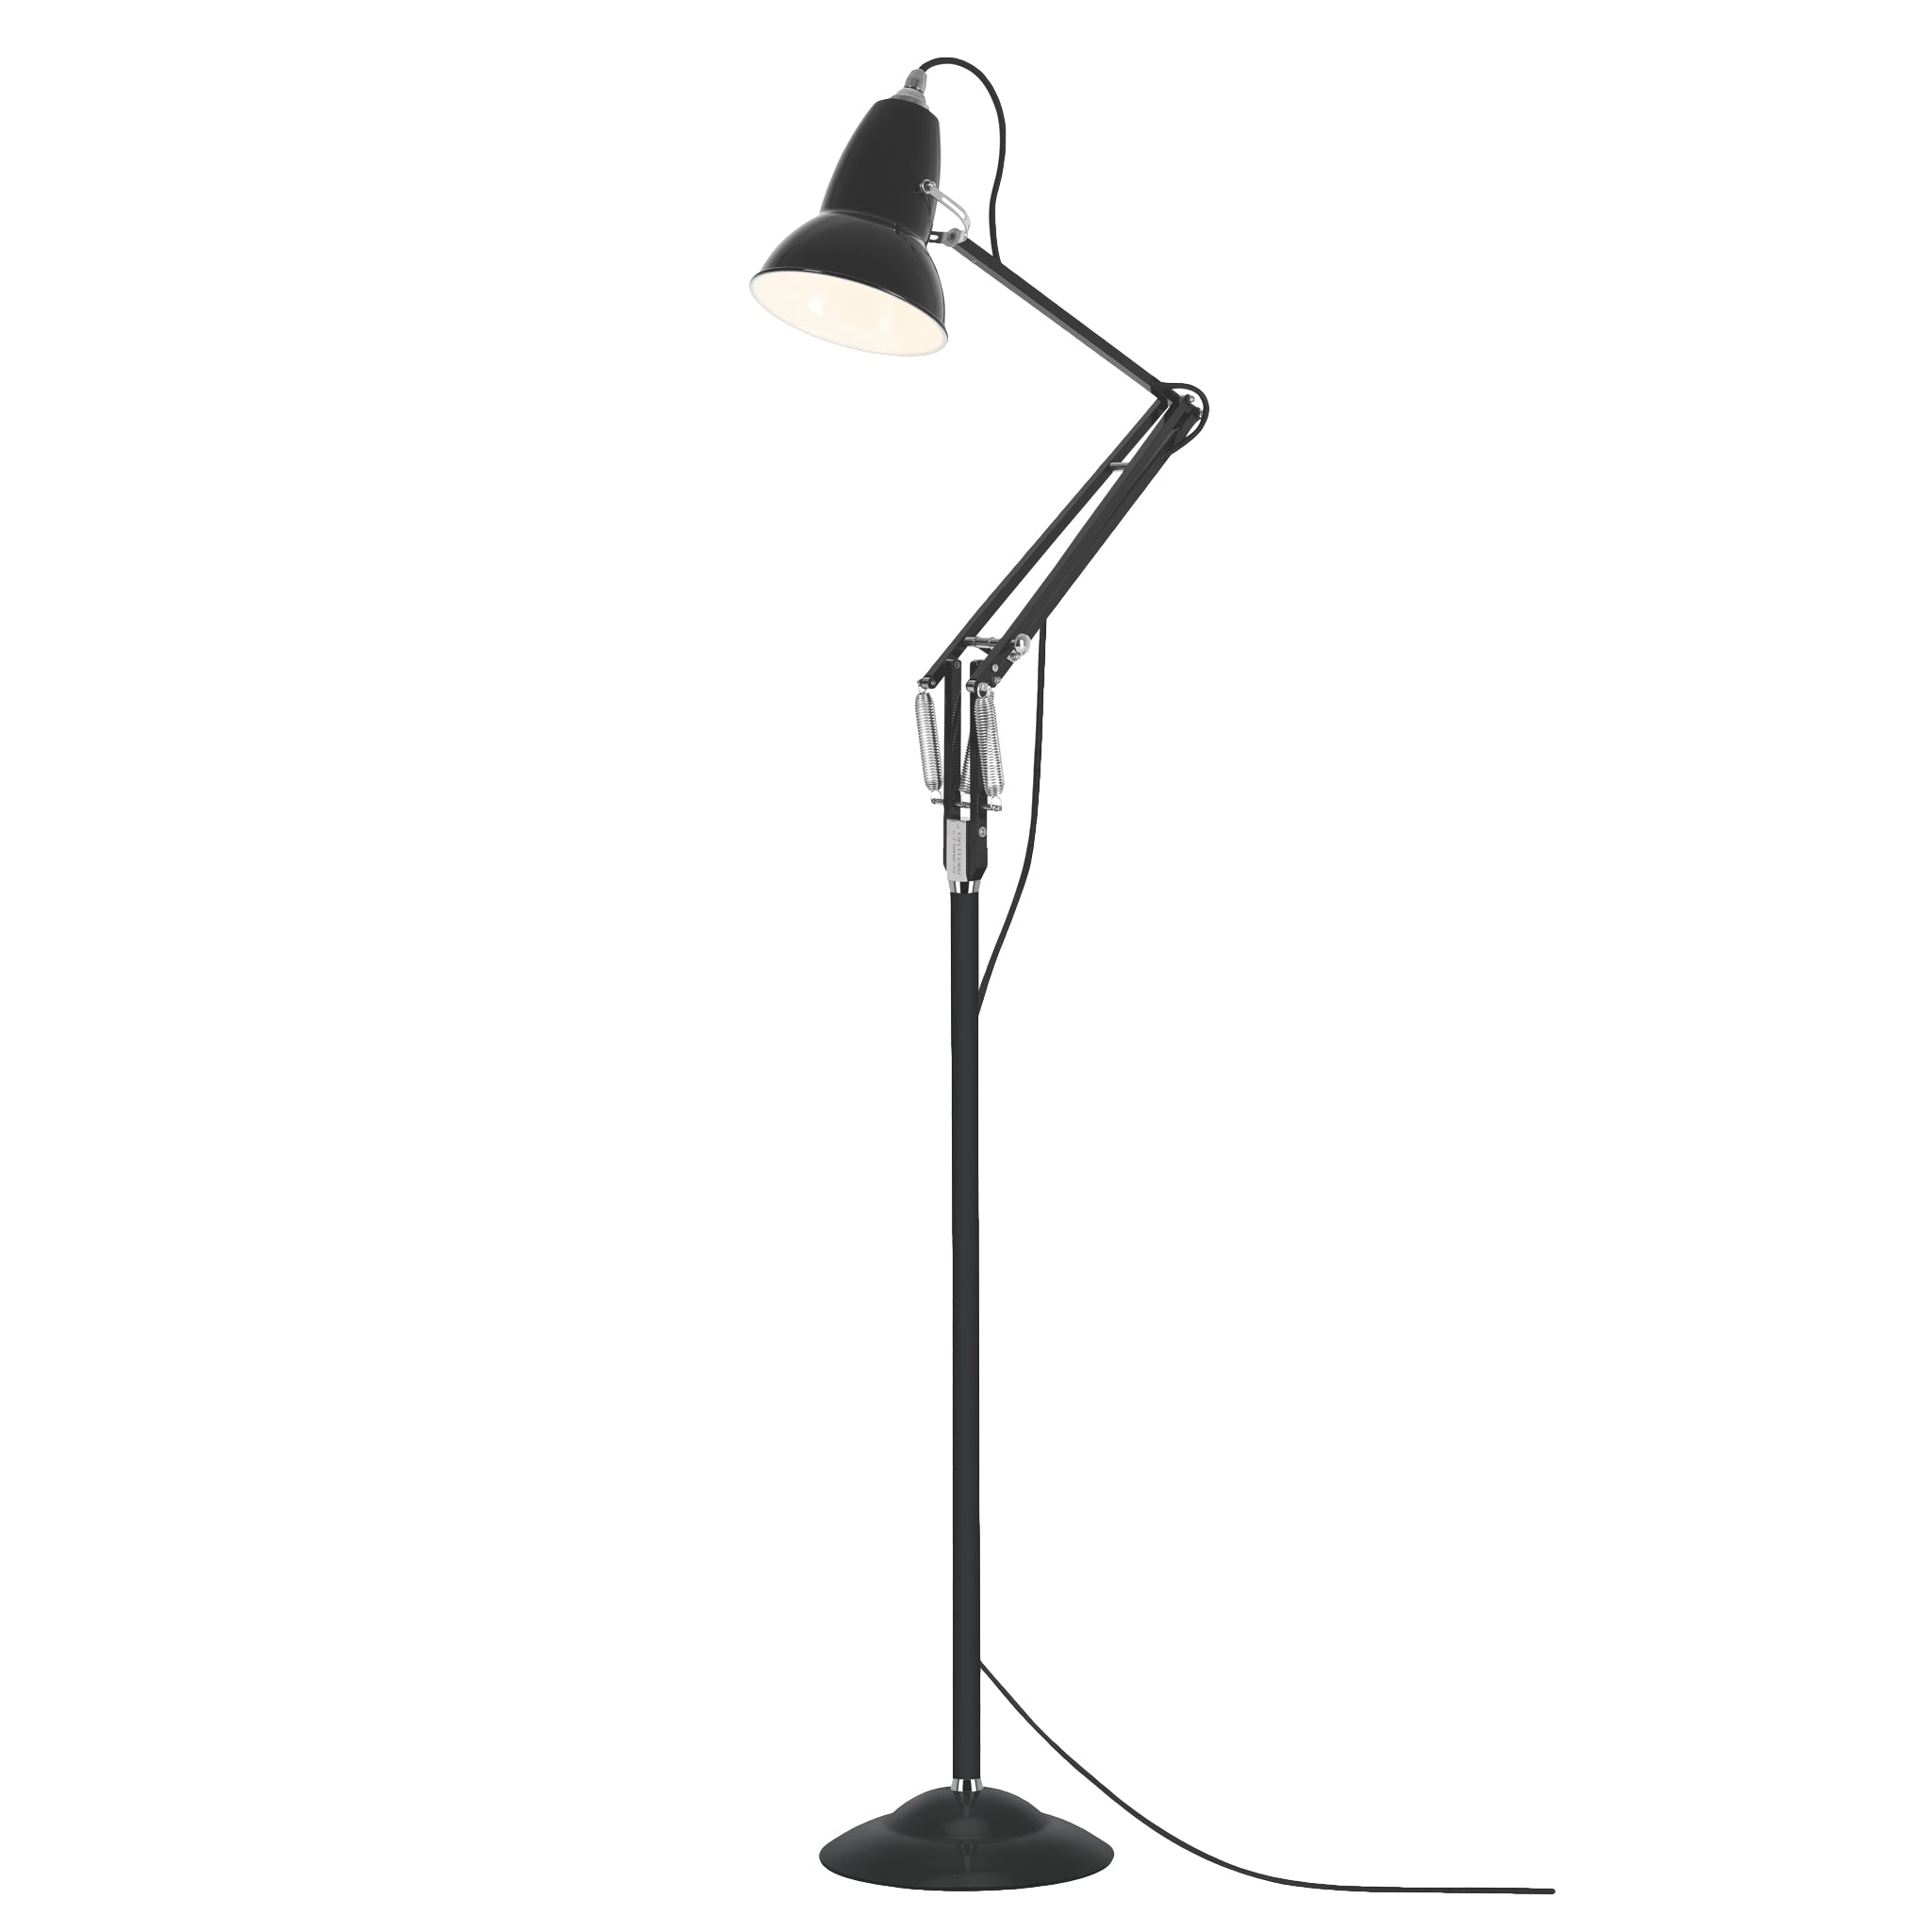 Original 1227 Floor Lamp by Anglepoise